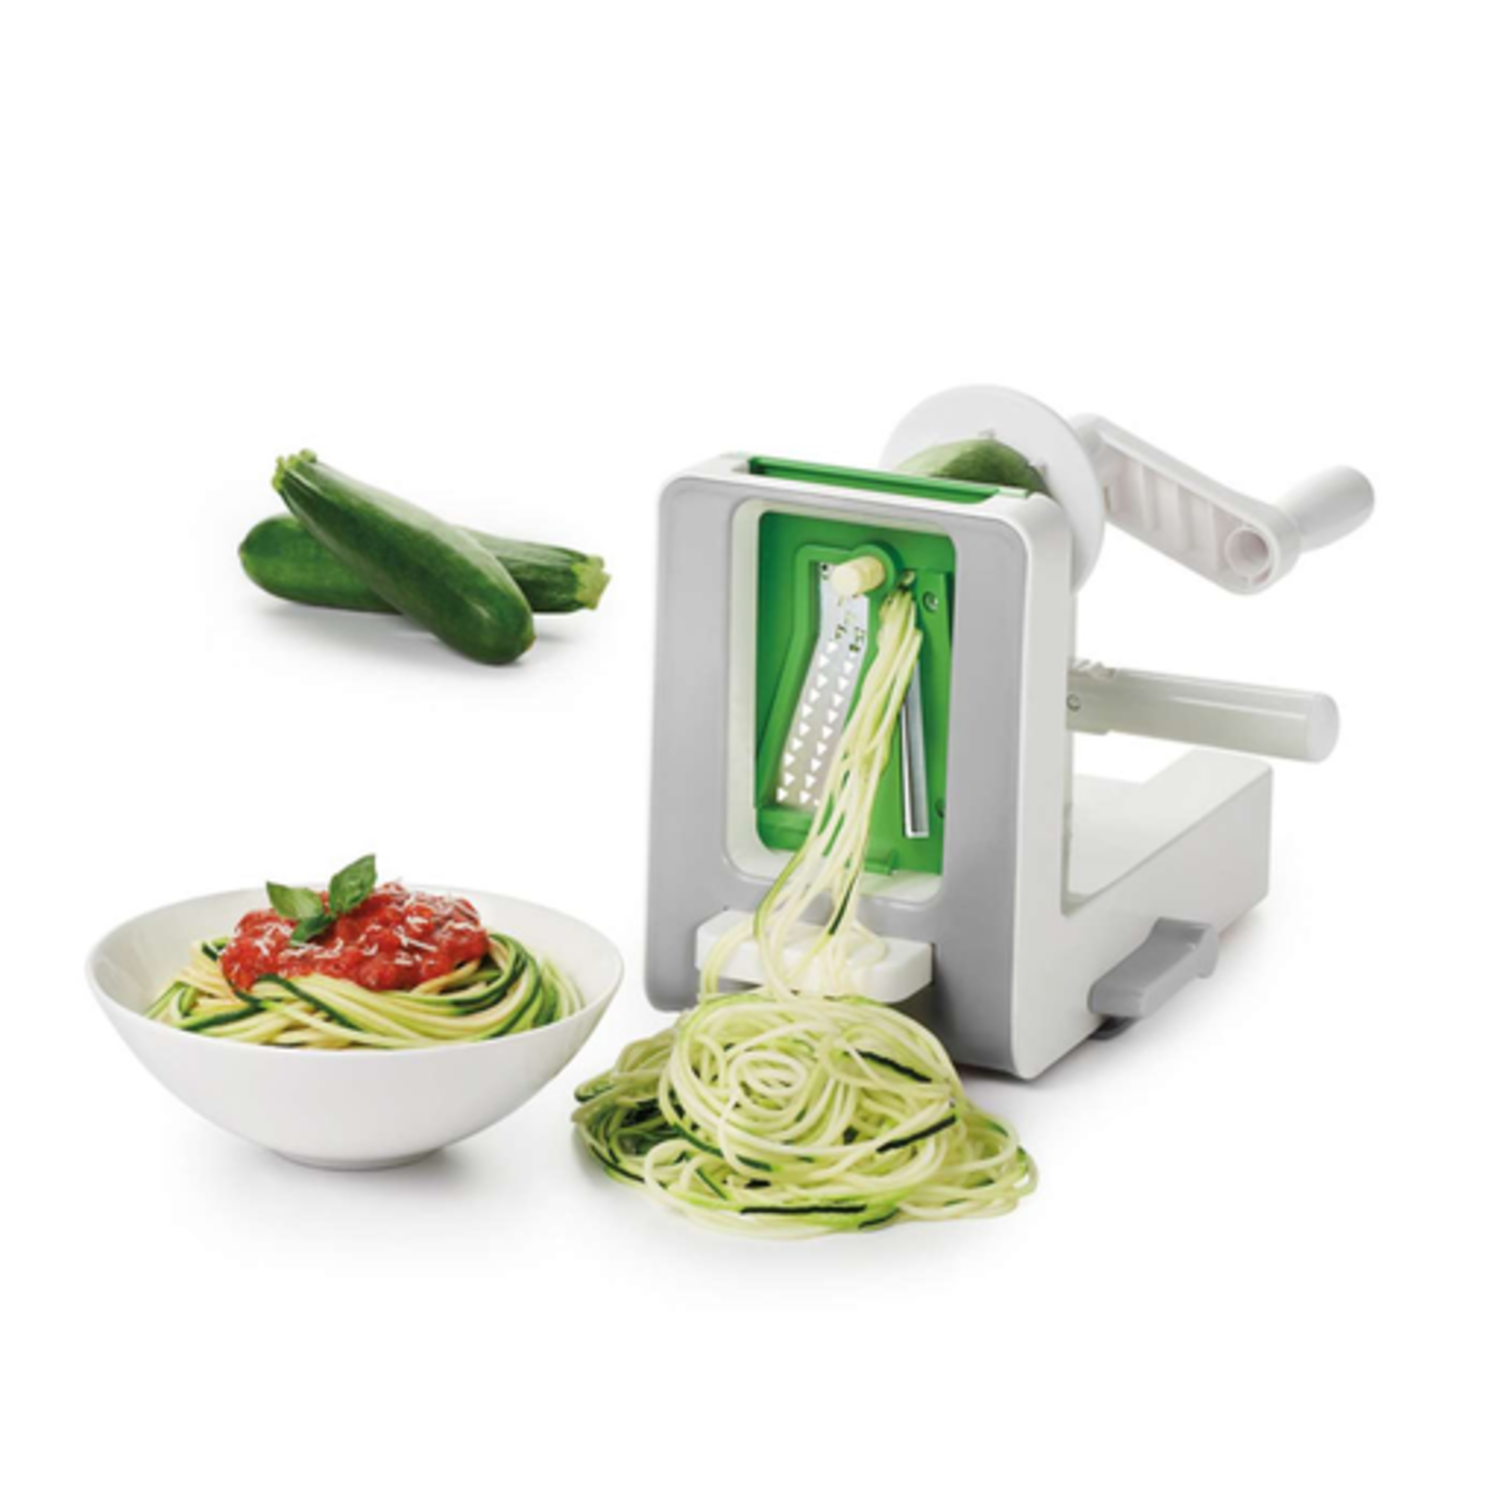 grund Amazon Jungle Afvise OXO OXO Tabletop Spiralizer with 3 blades - Whisk